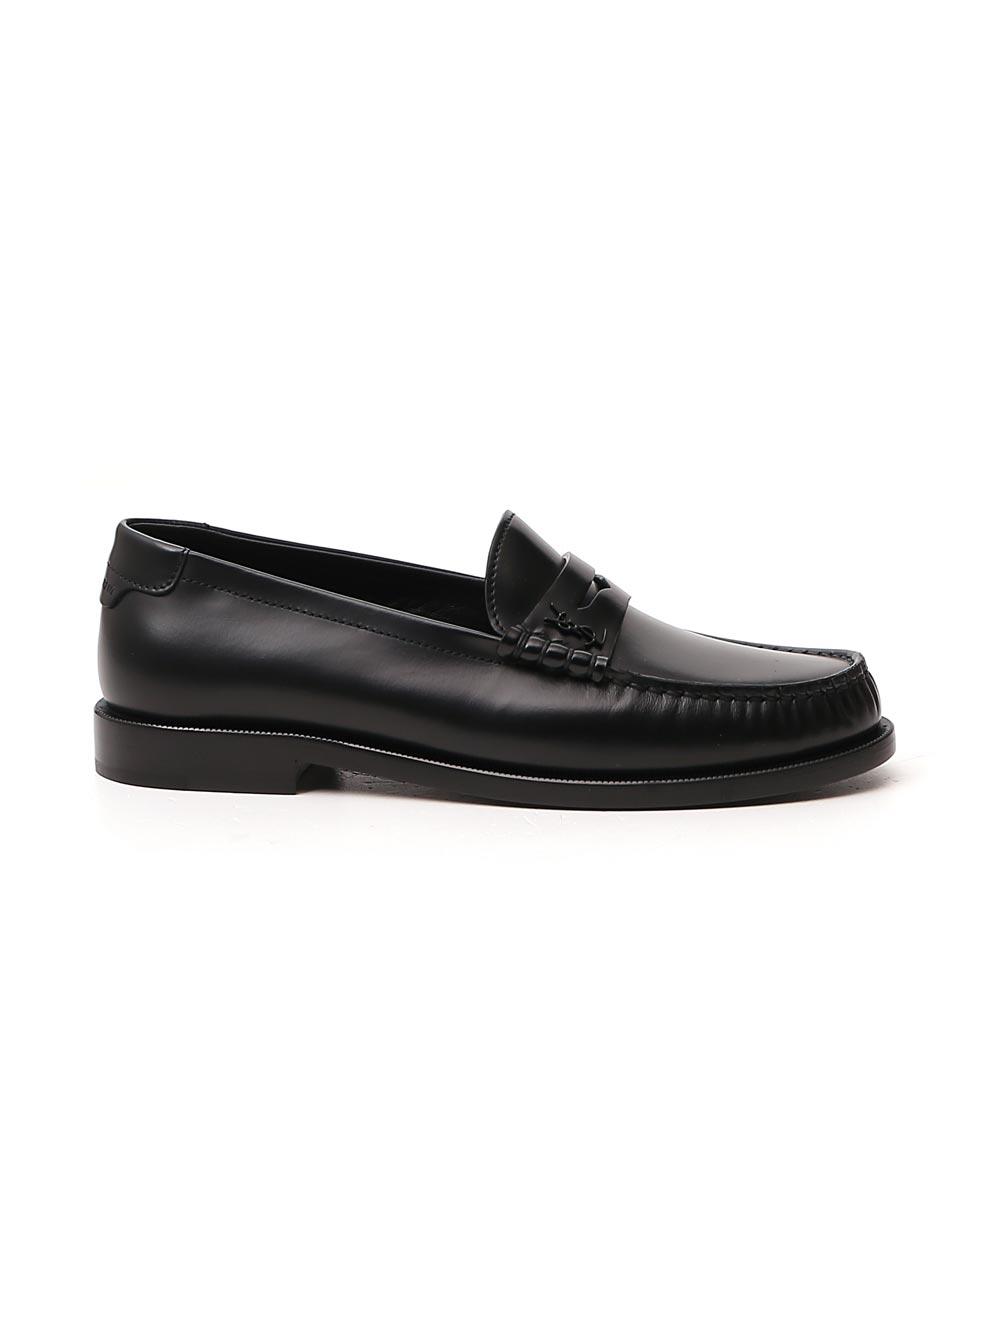 Saint Laurent Leather Monogram Penny Loafers in Black - Lyst